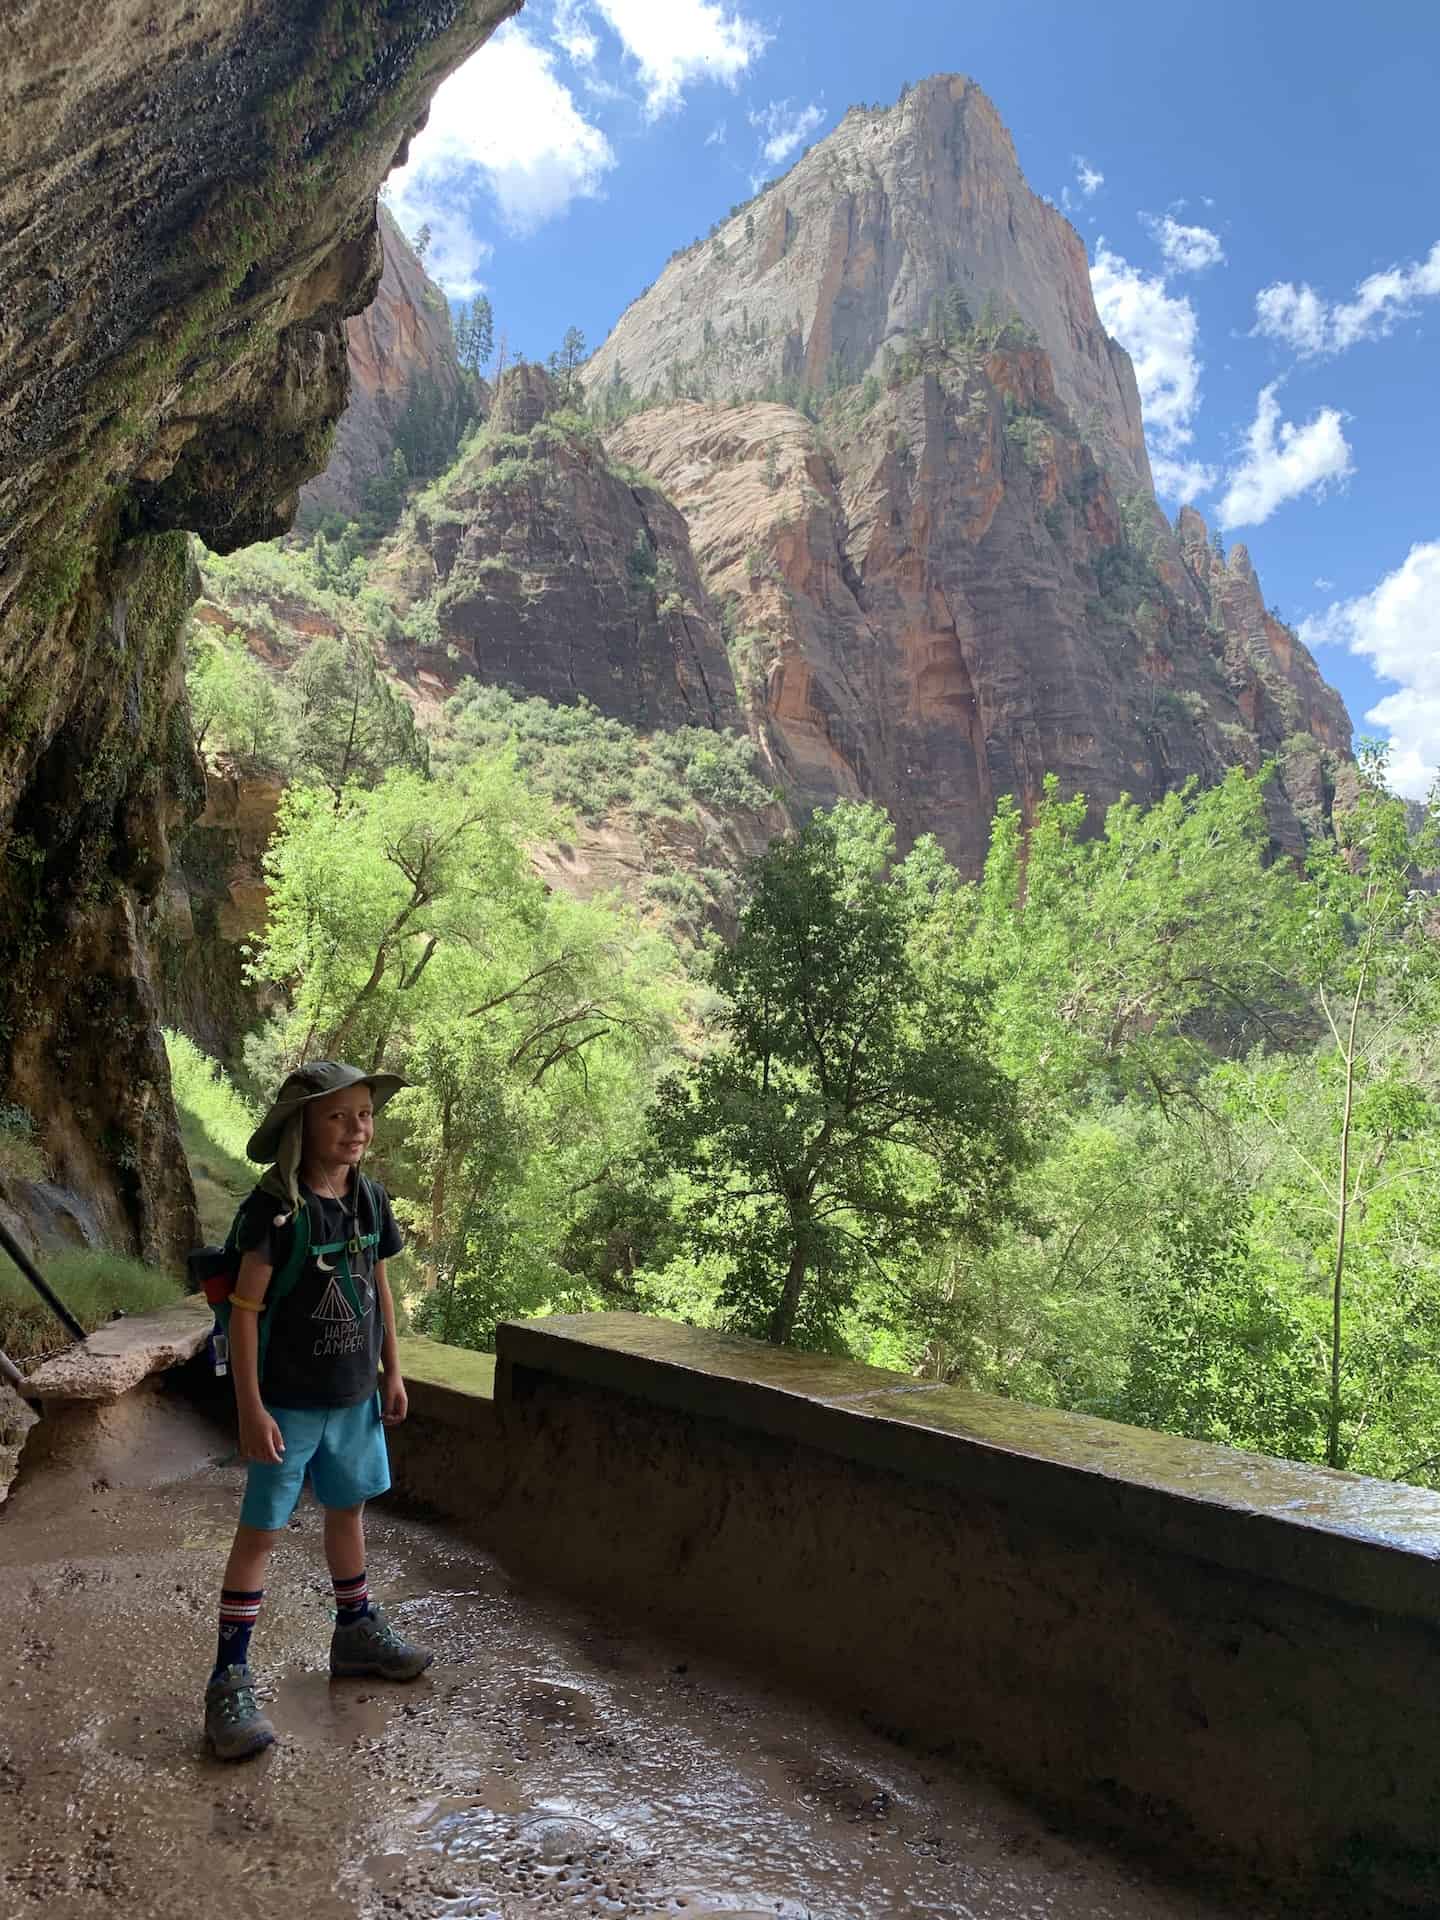 Boy standing in front of Weeping Rock in Zion National Park